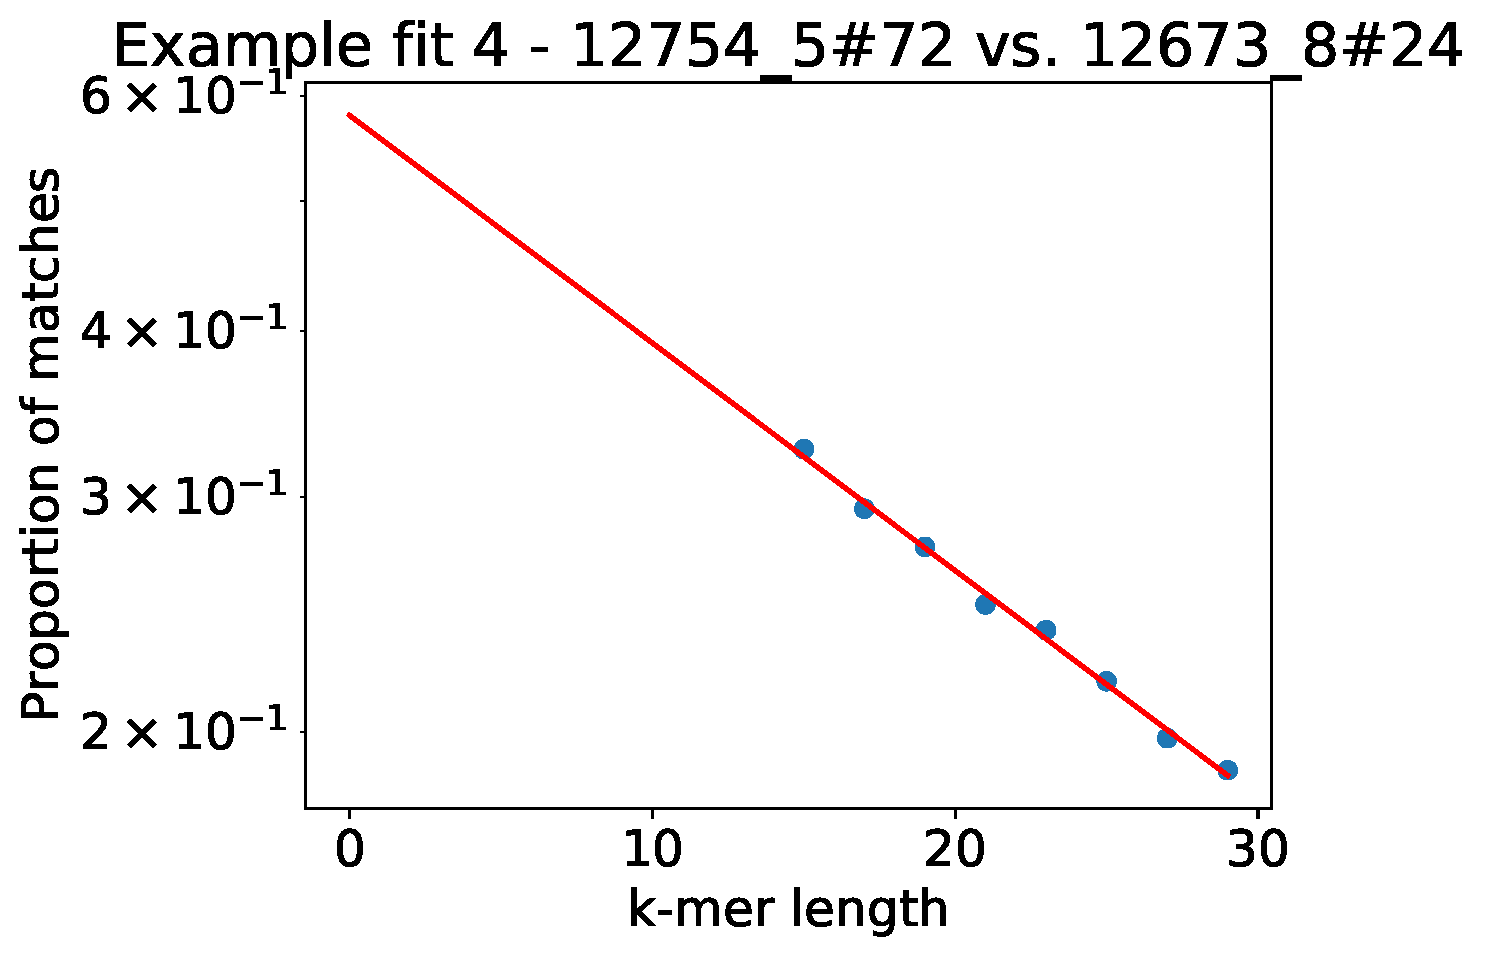 A fixed fit to k-mer distances